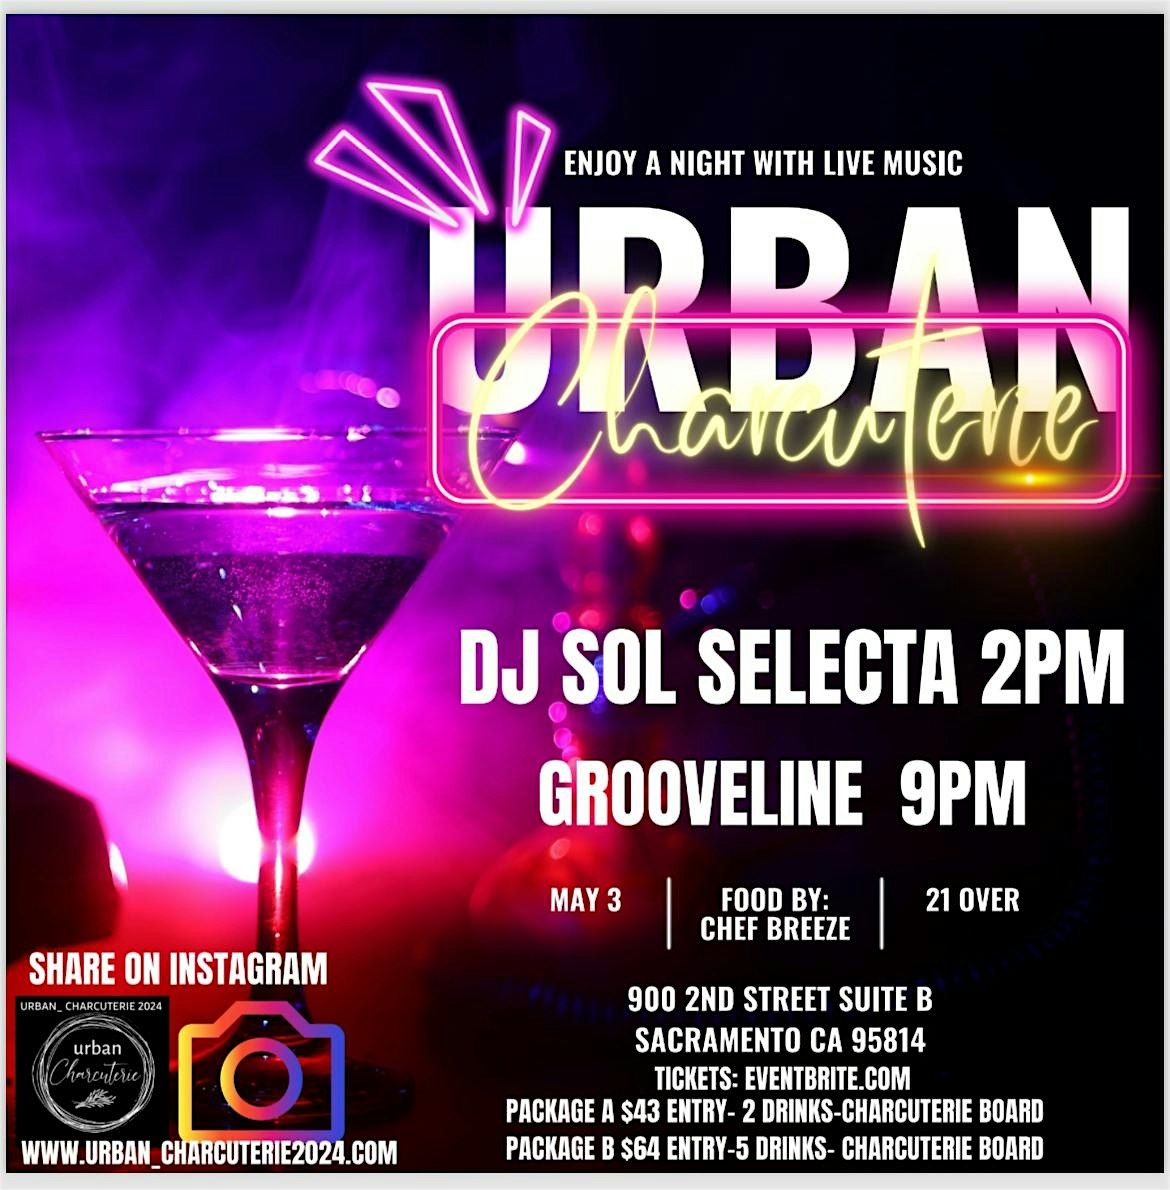 Urban Charcuterie presents live music from Grooveline & Sol Selecta